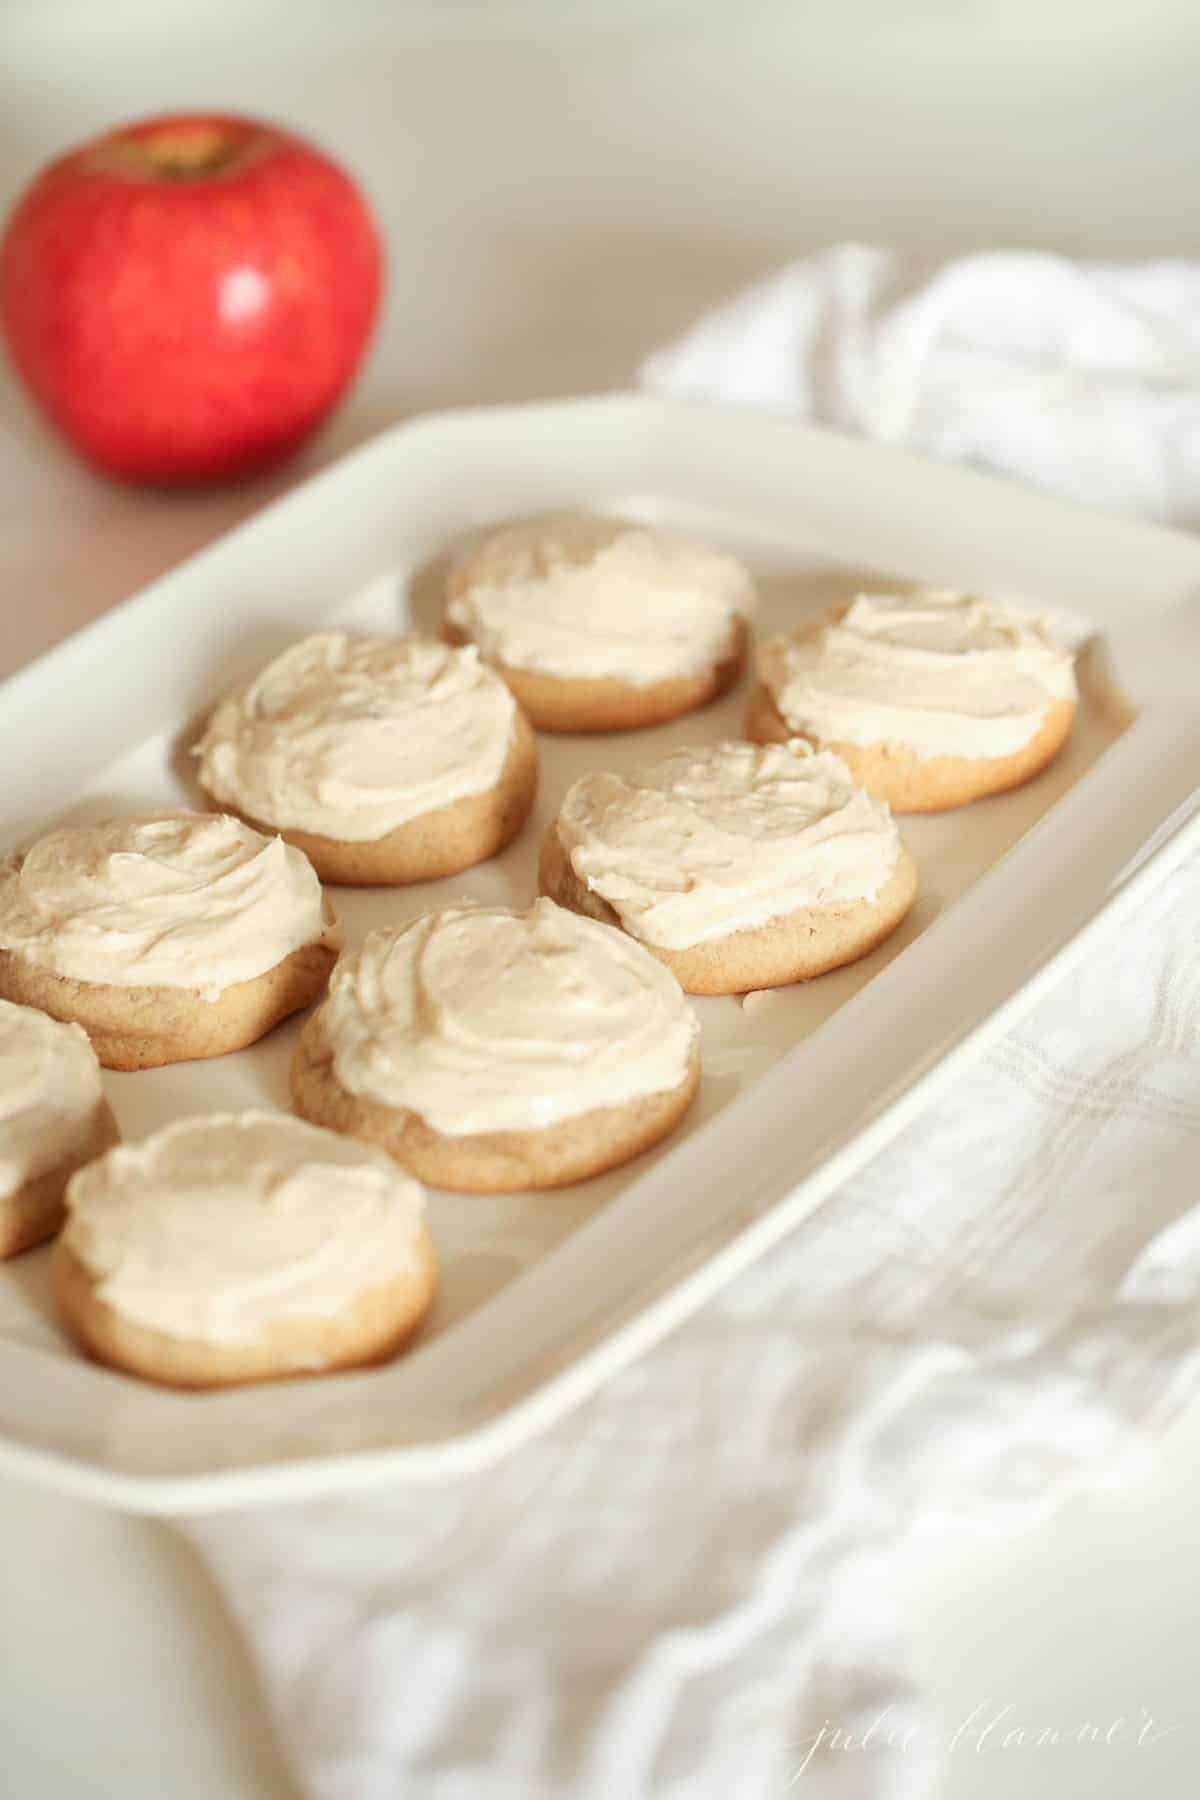 White tray on top of white linen towel, apple in background- frosted apple sugar cookies on tray.